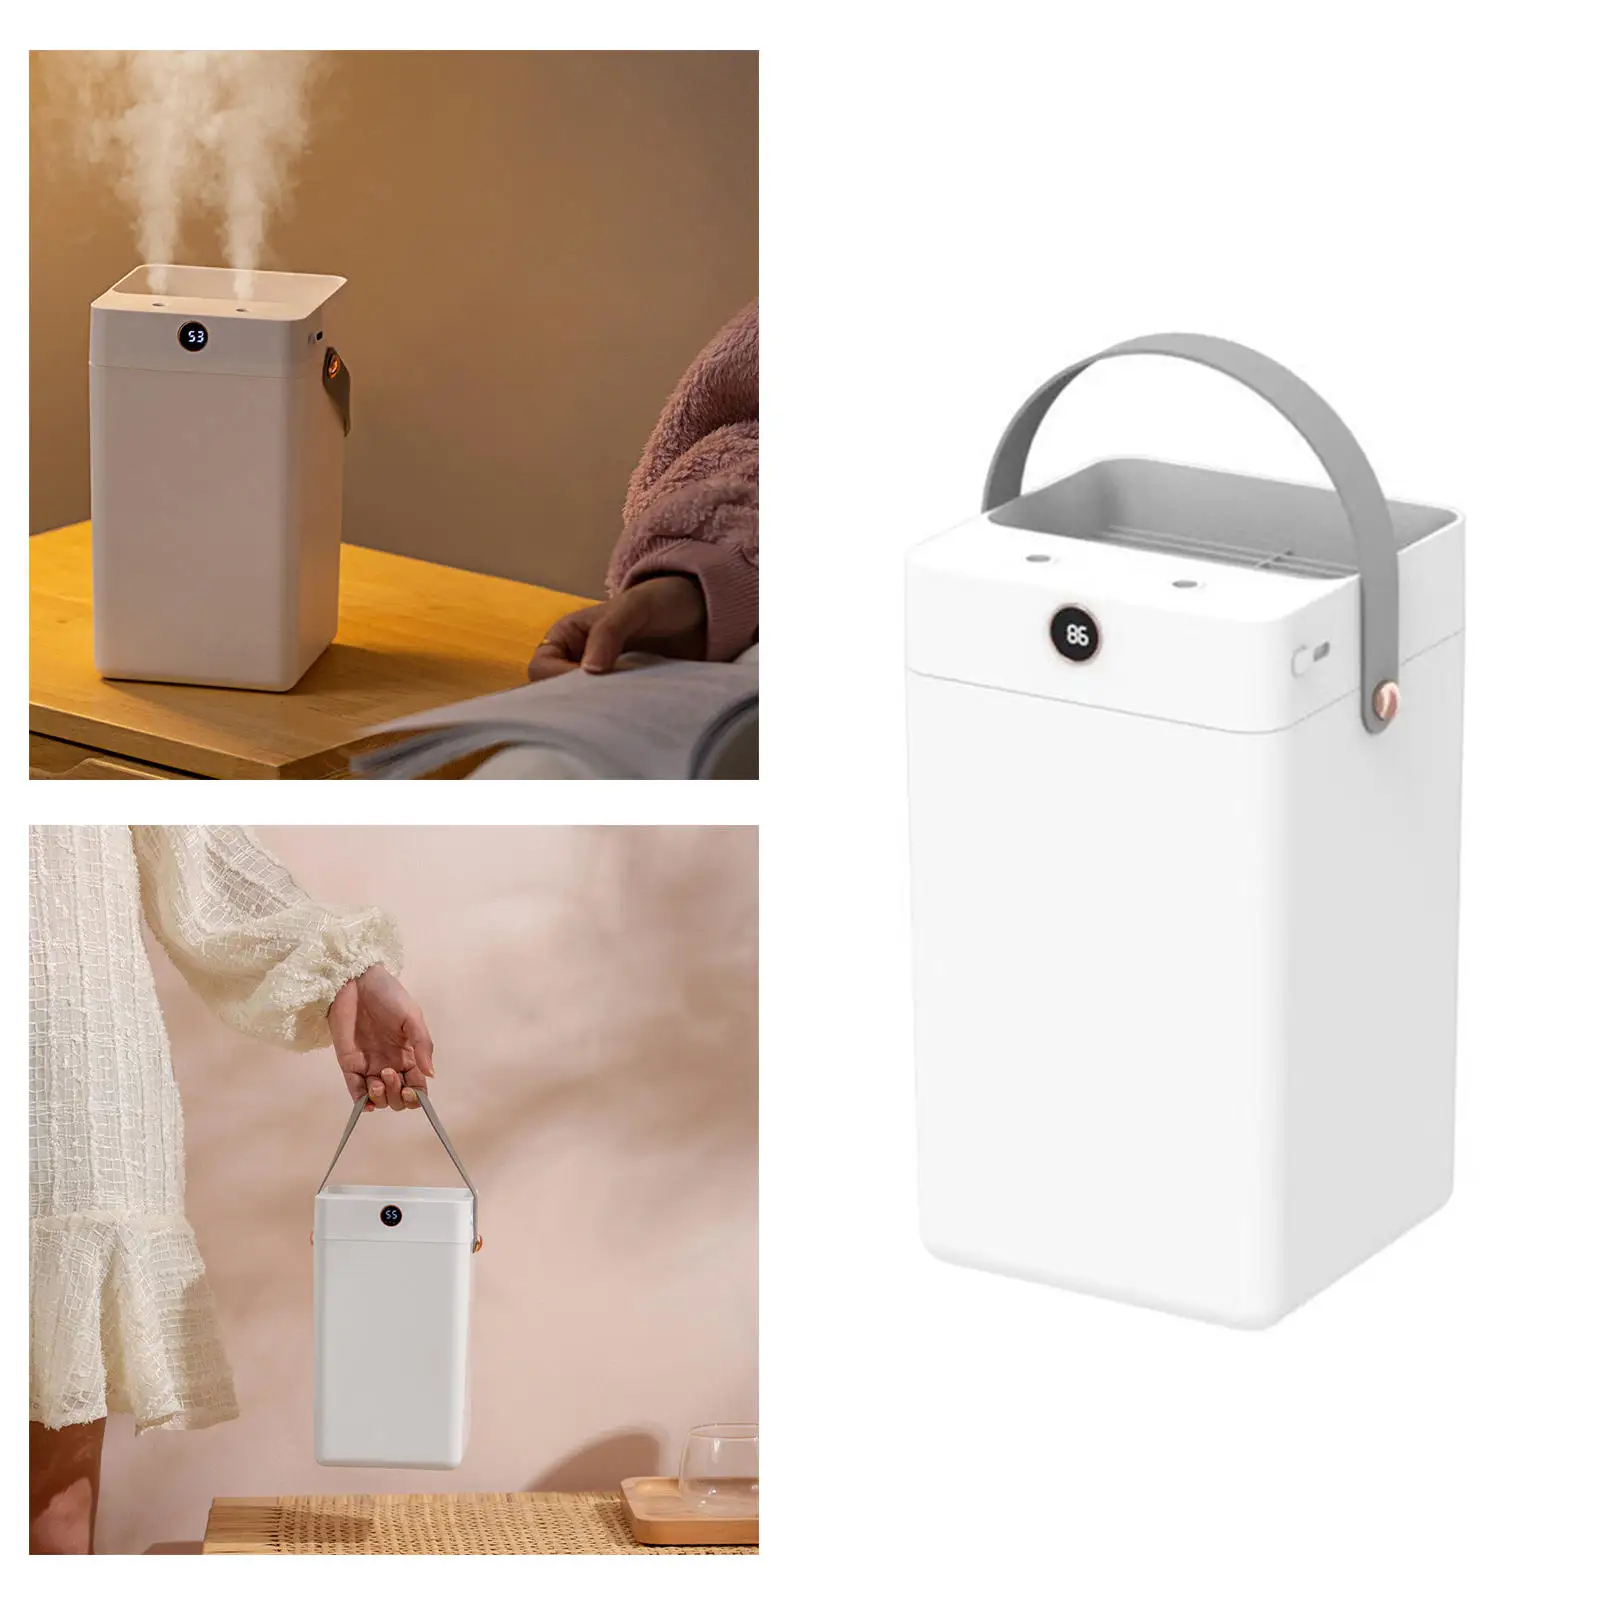 Quiet Double Nozzles Air Humidifier 3000ml 10 Hours Portable Nebulizing Electric Cool Mist XL for Big Room Huge Area Office Home